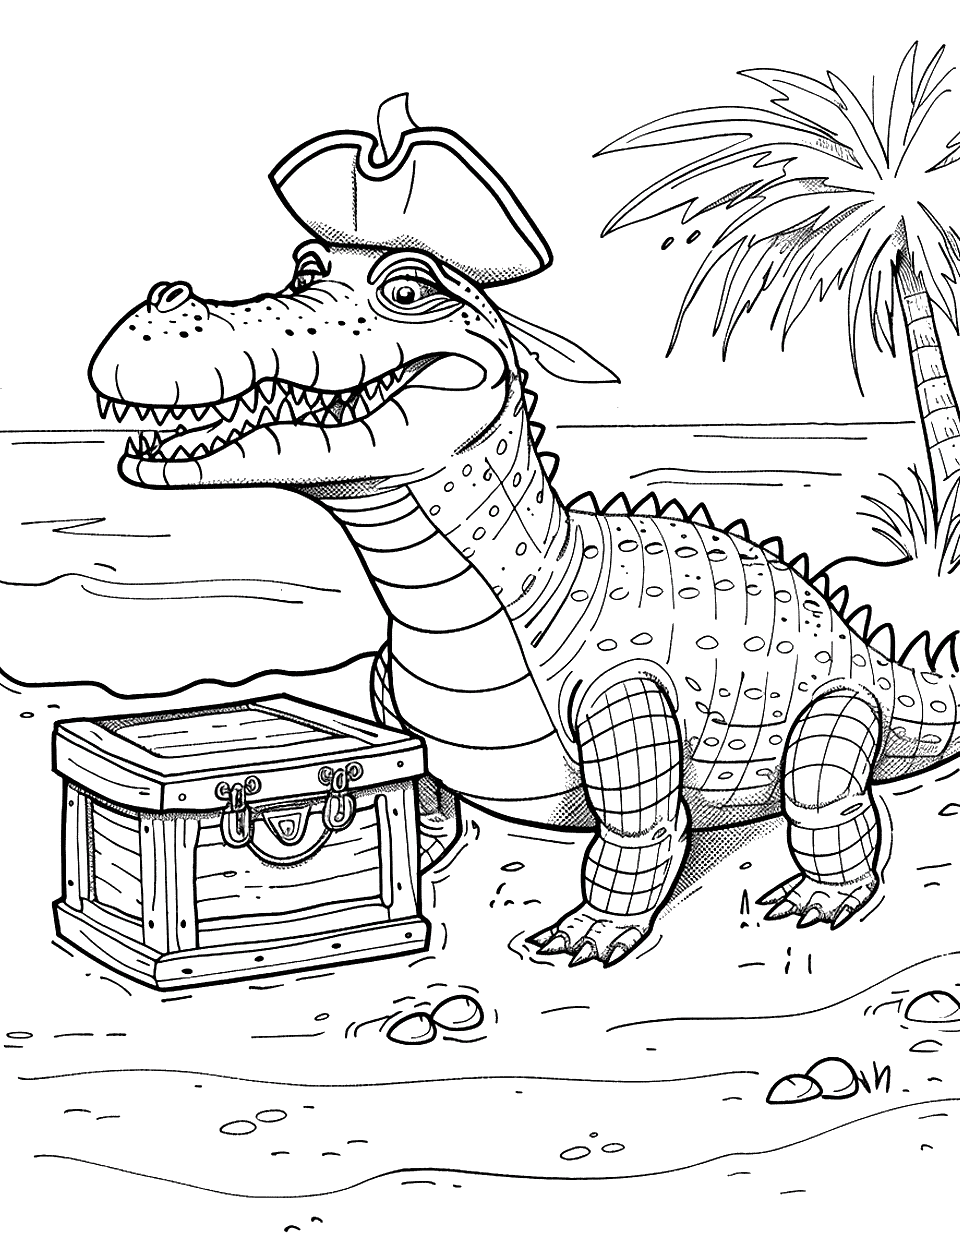 Crocodile Treasure Hunter Coloring Page - A crocodile dressed as a pirate, standing next to a treasure chest on a sandy beach.